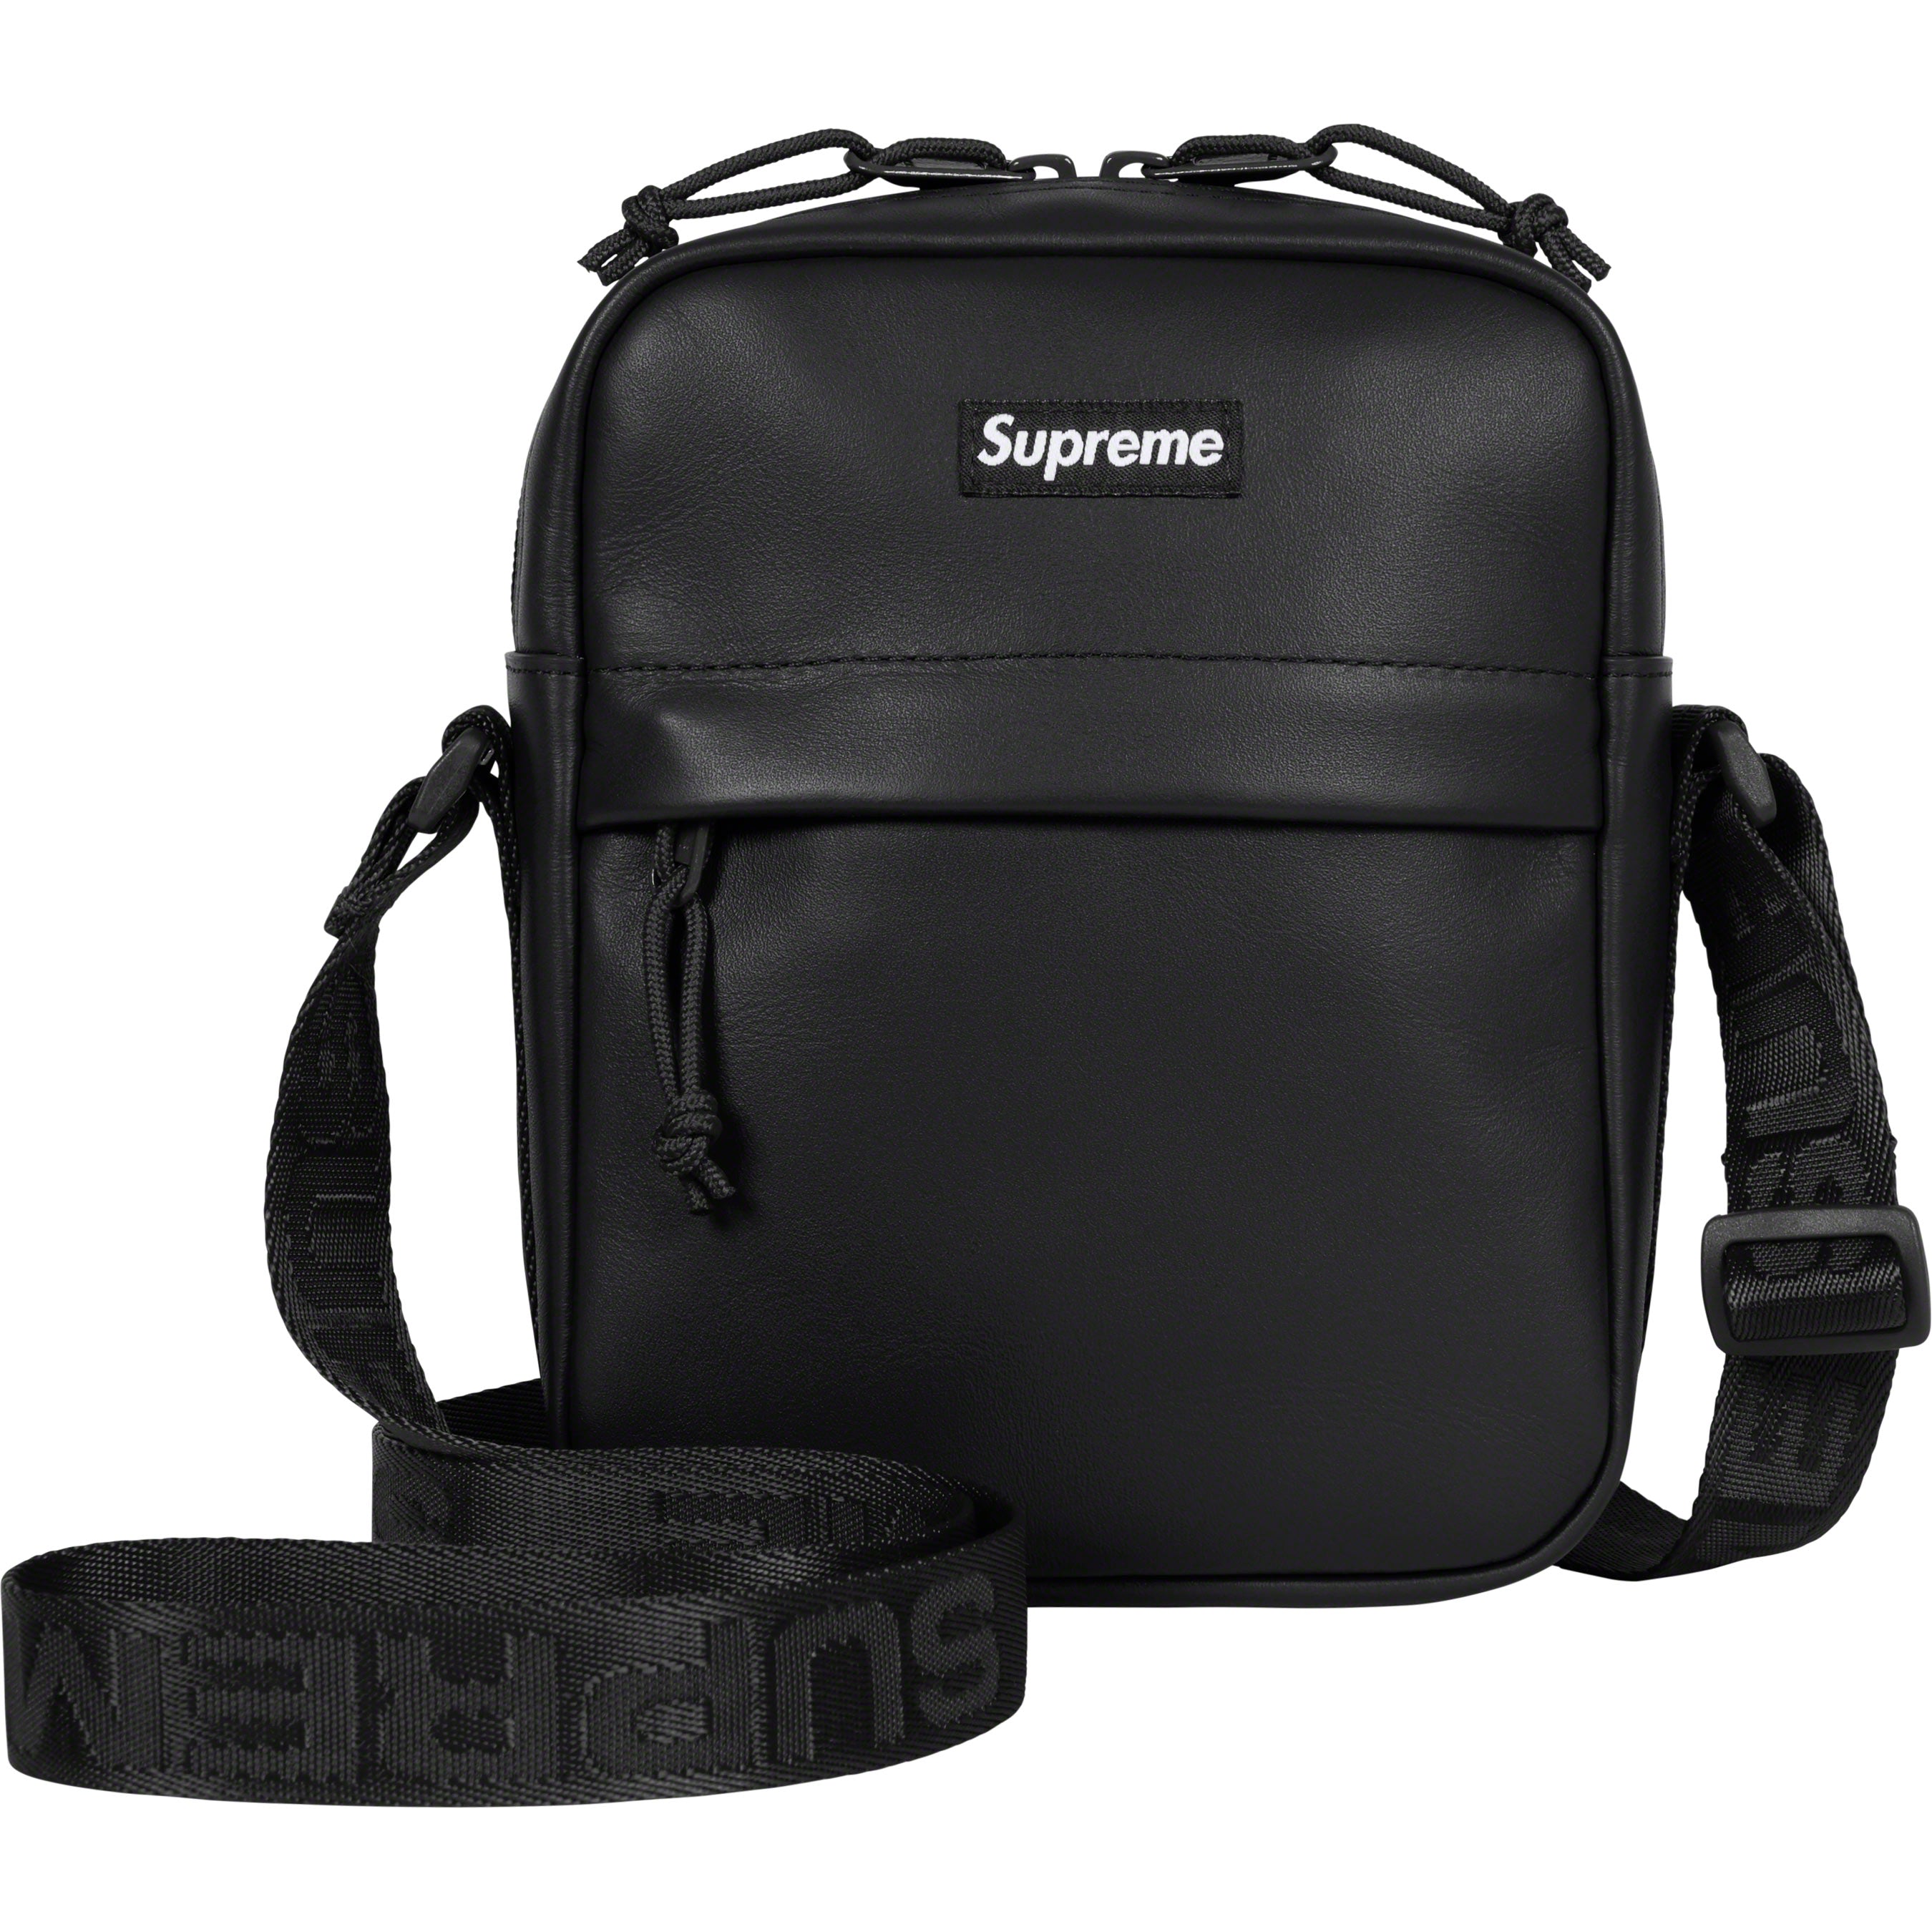 Supreme Shoulder Bag It just any other bag without the Supreme